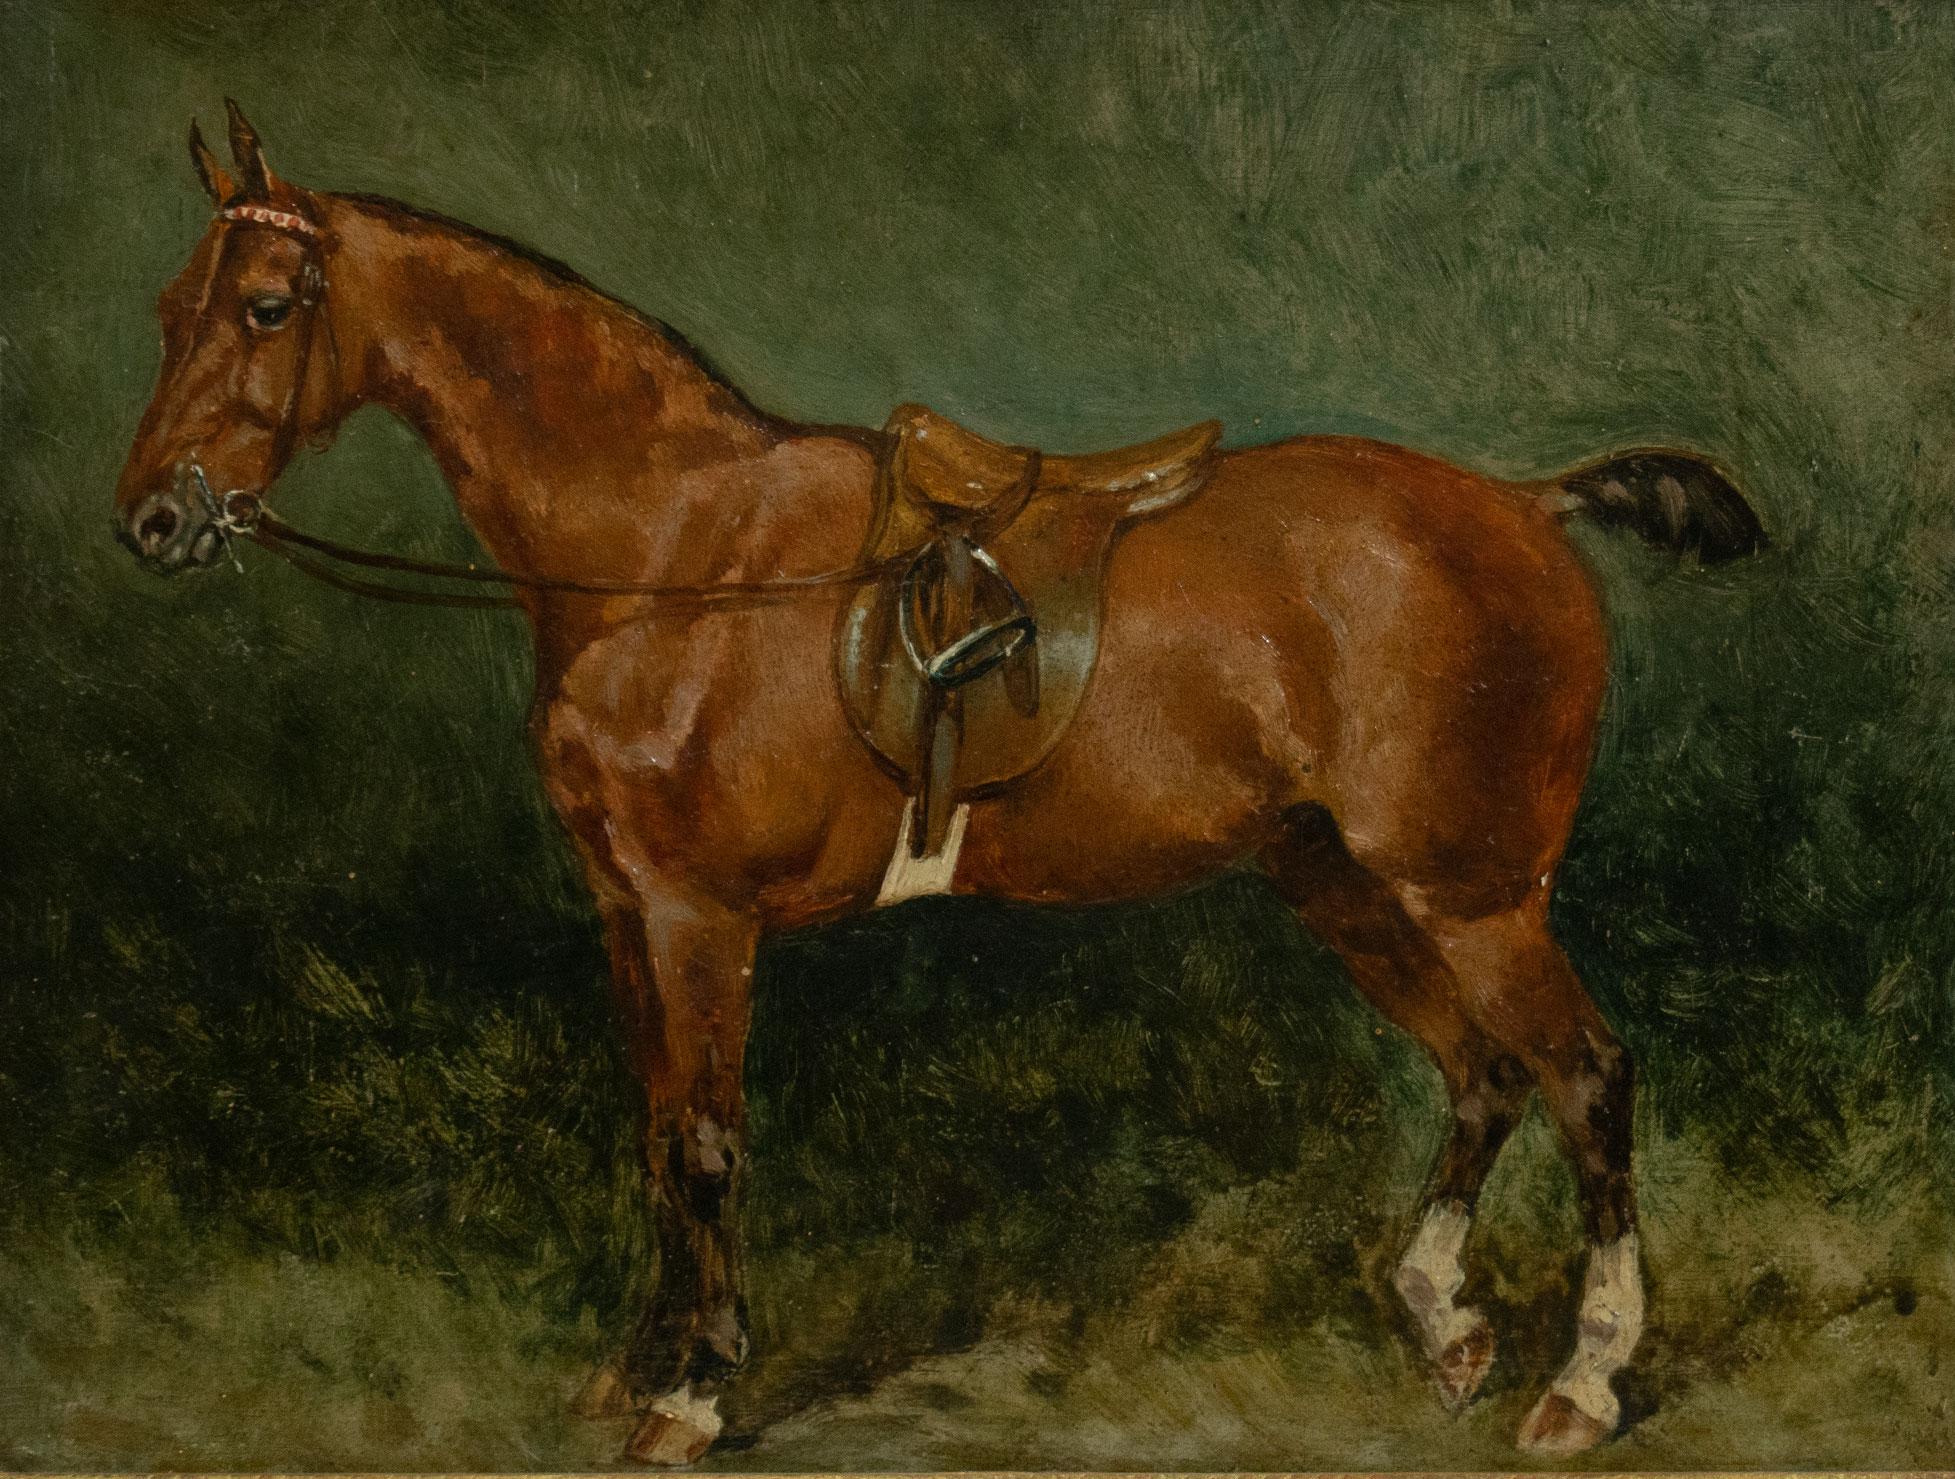 French School Late 19th century. The Bay Riding Horse.

Oil on panel, unsigned. Painting of a bridled and saddled bay horse with traditional docked tail of the period.

21.5 x 27.2cm.

Mounted in an Italian carved, gilded wooden frame decorated with